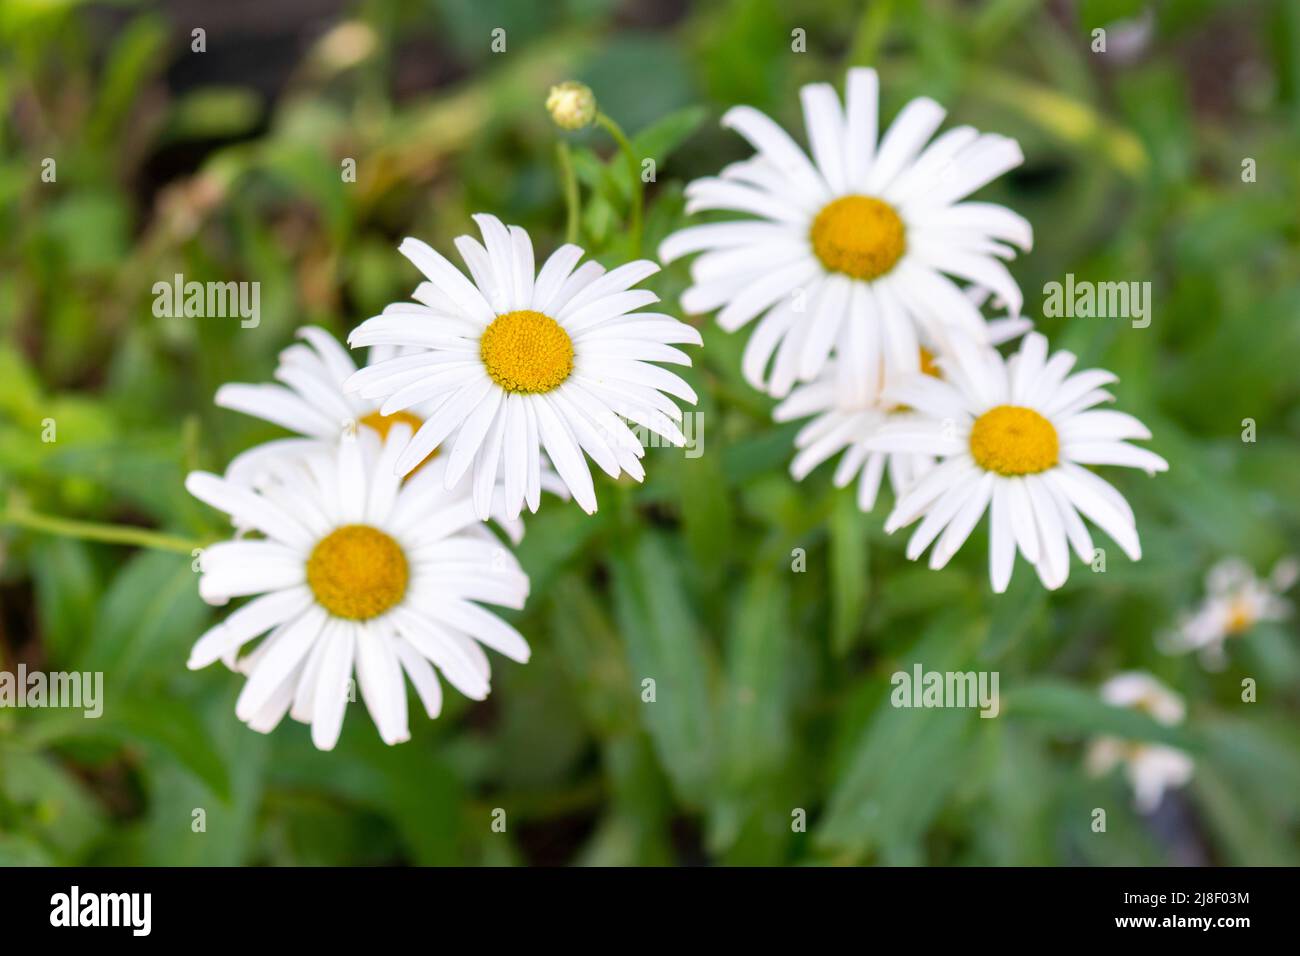 Selective focus shot of great white daisies. Stock Photo